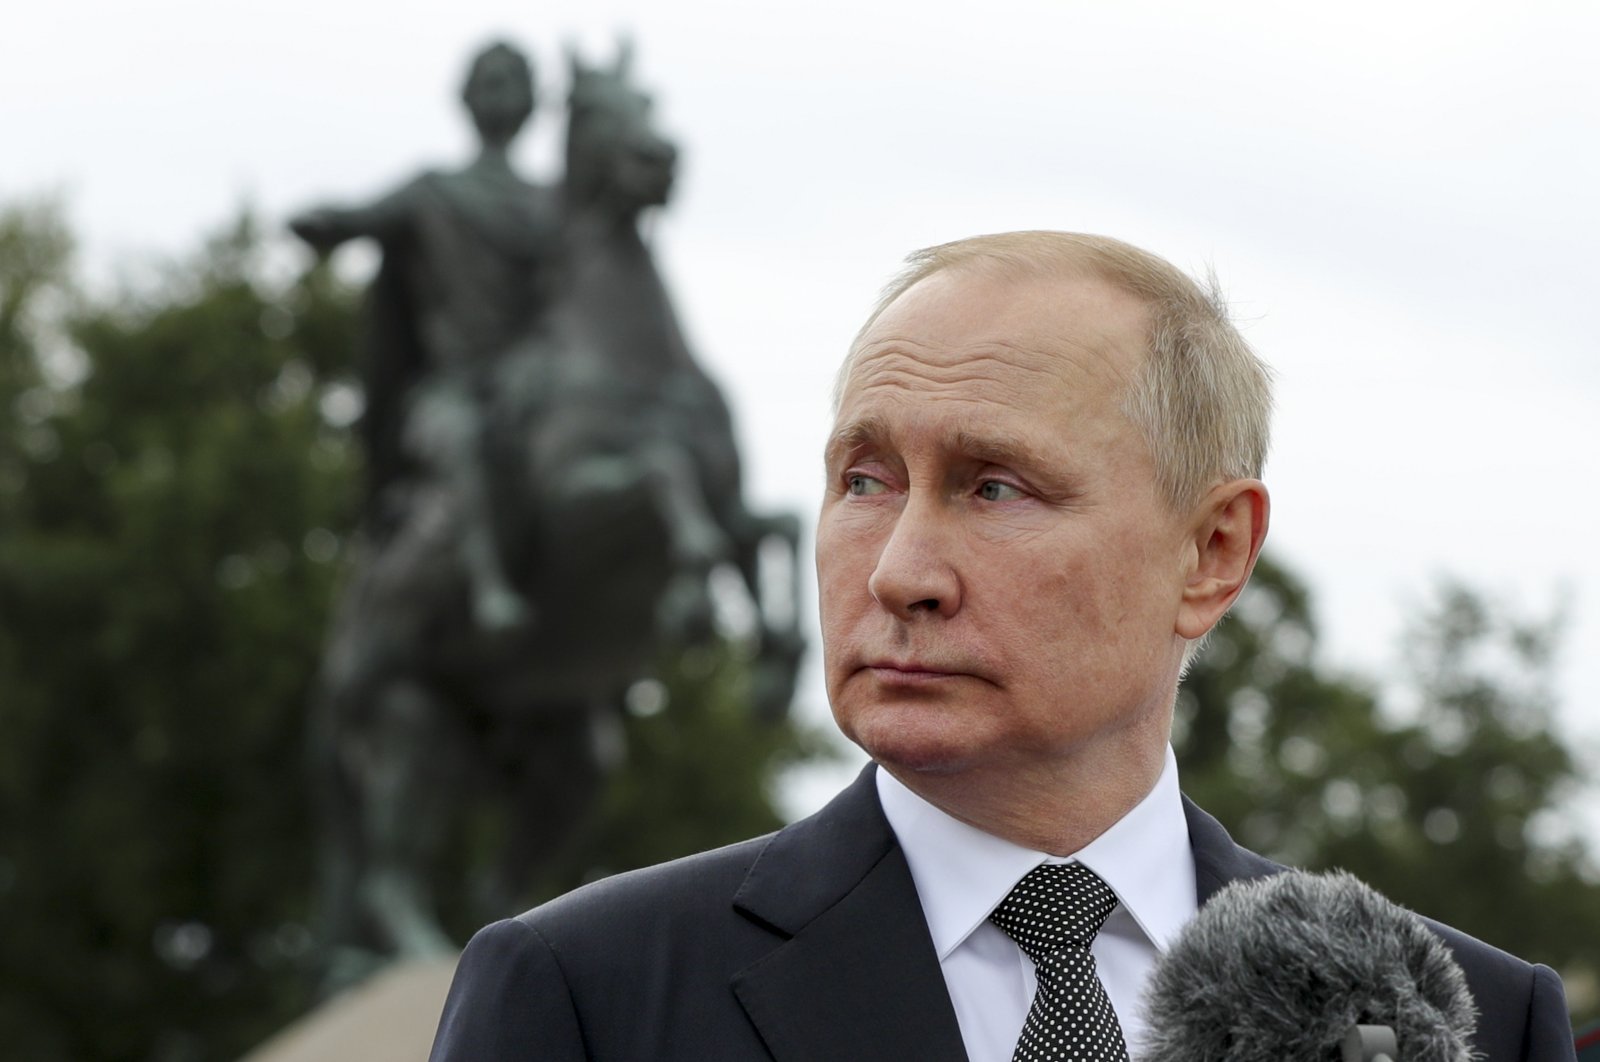 Russian President Vladimir Putin delivers a speech in front of the equestrian statue of Peter the Great, on the Neva River, in St. Petersburg, Russia, July 31, 2022. (AP Photo)